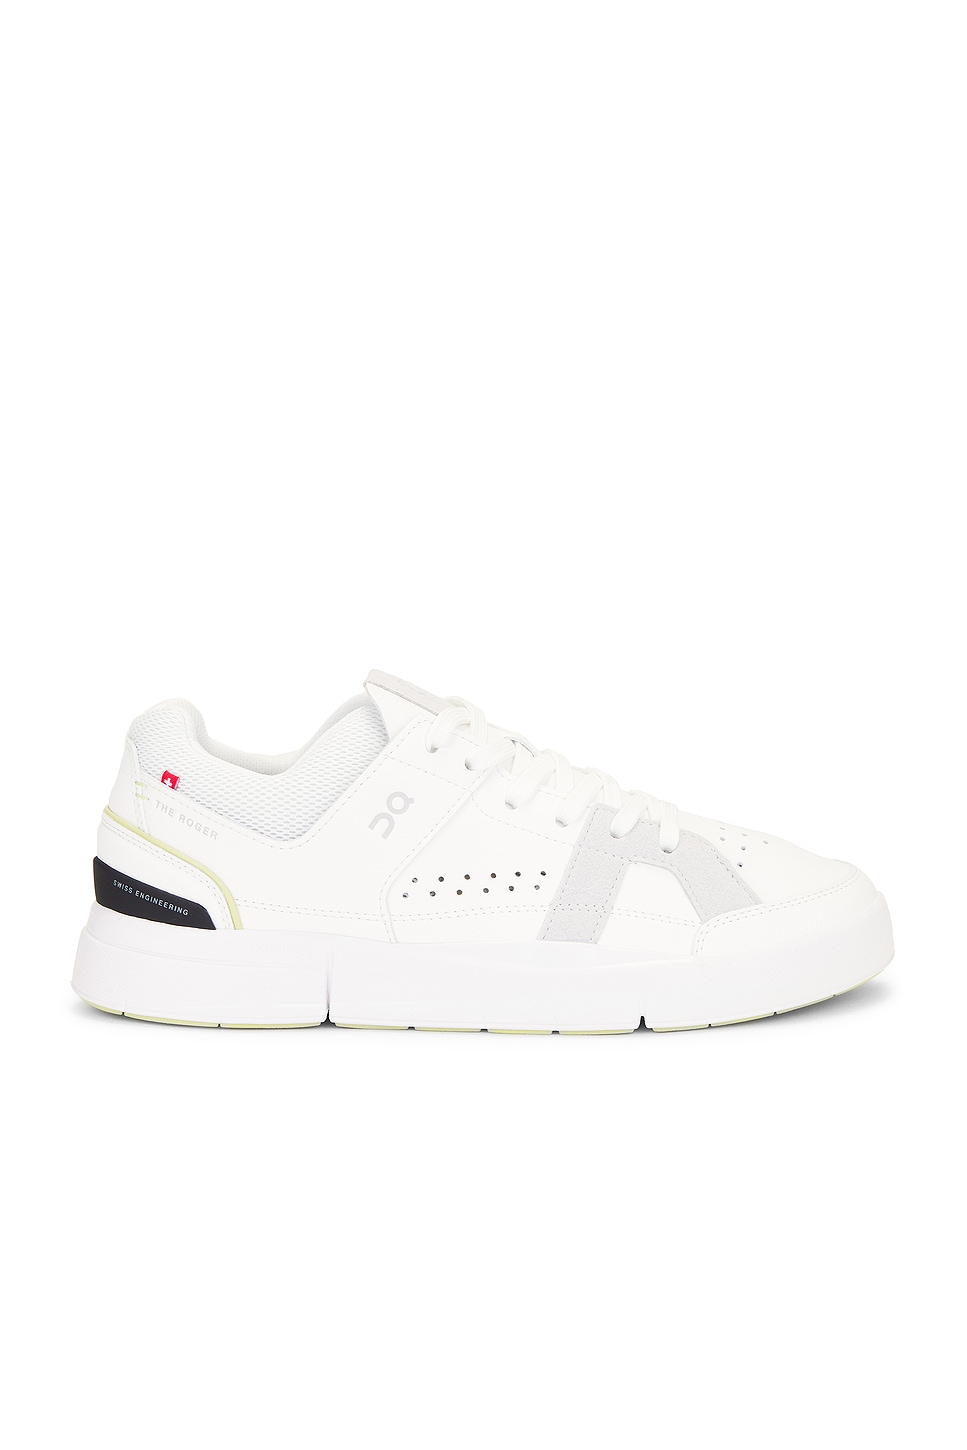 Image 1 of On The Roger Clubhouse Sneaker in White & Acacia